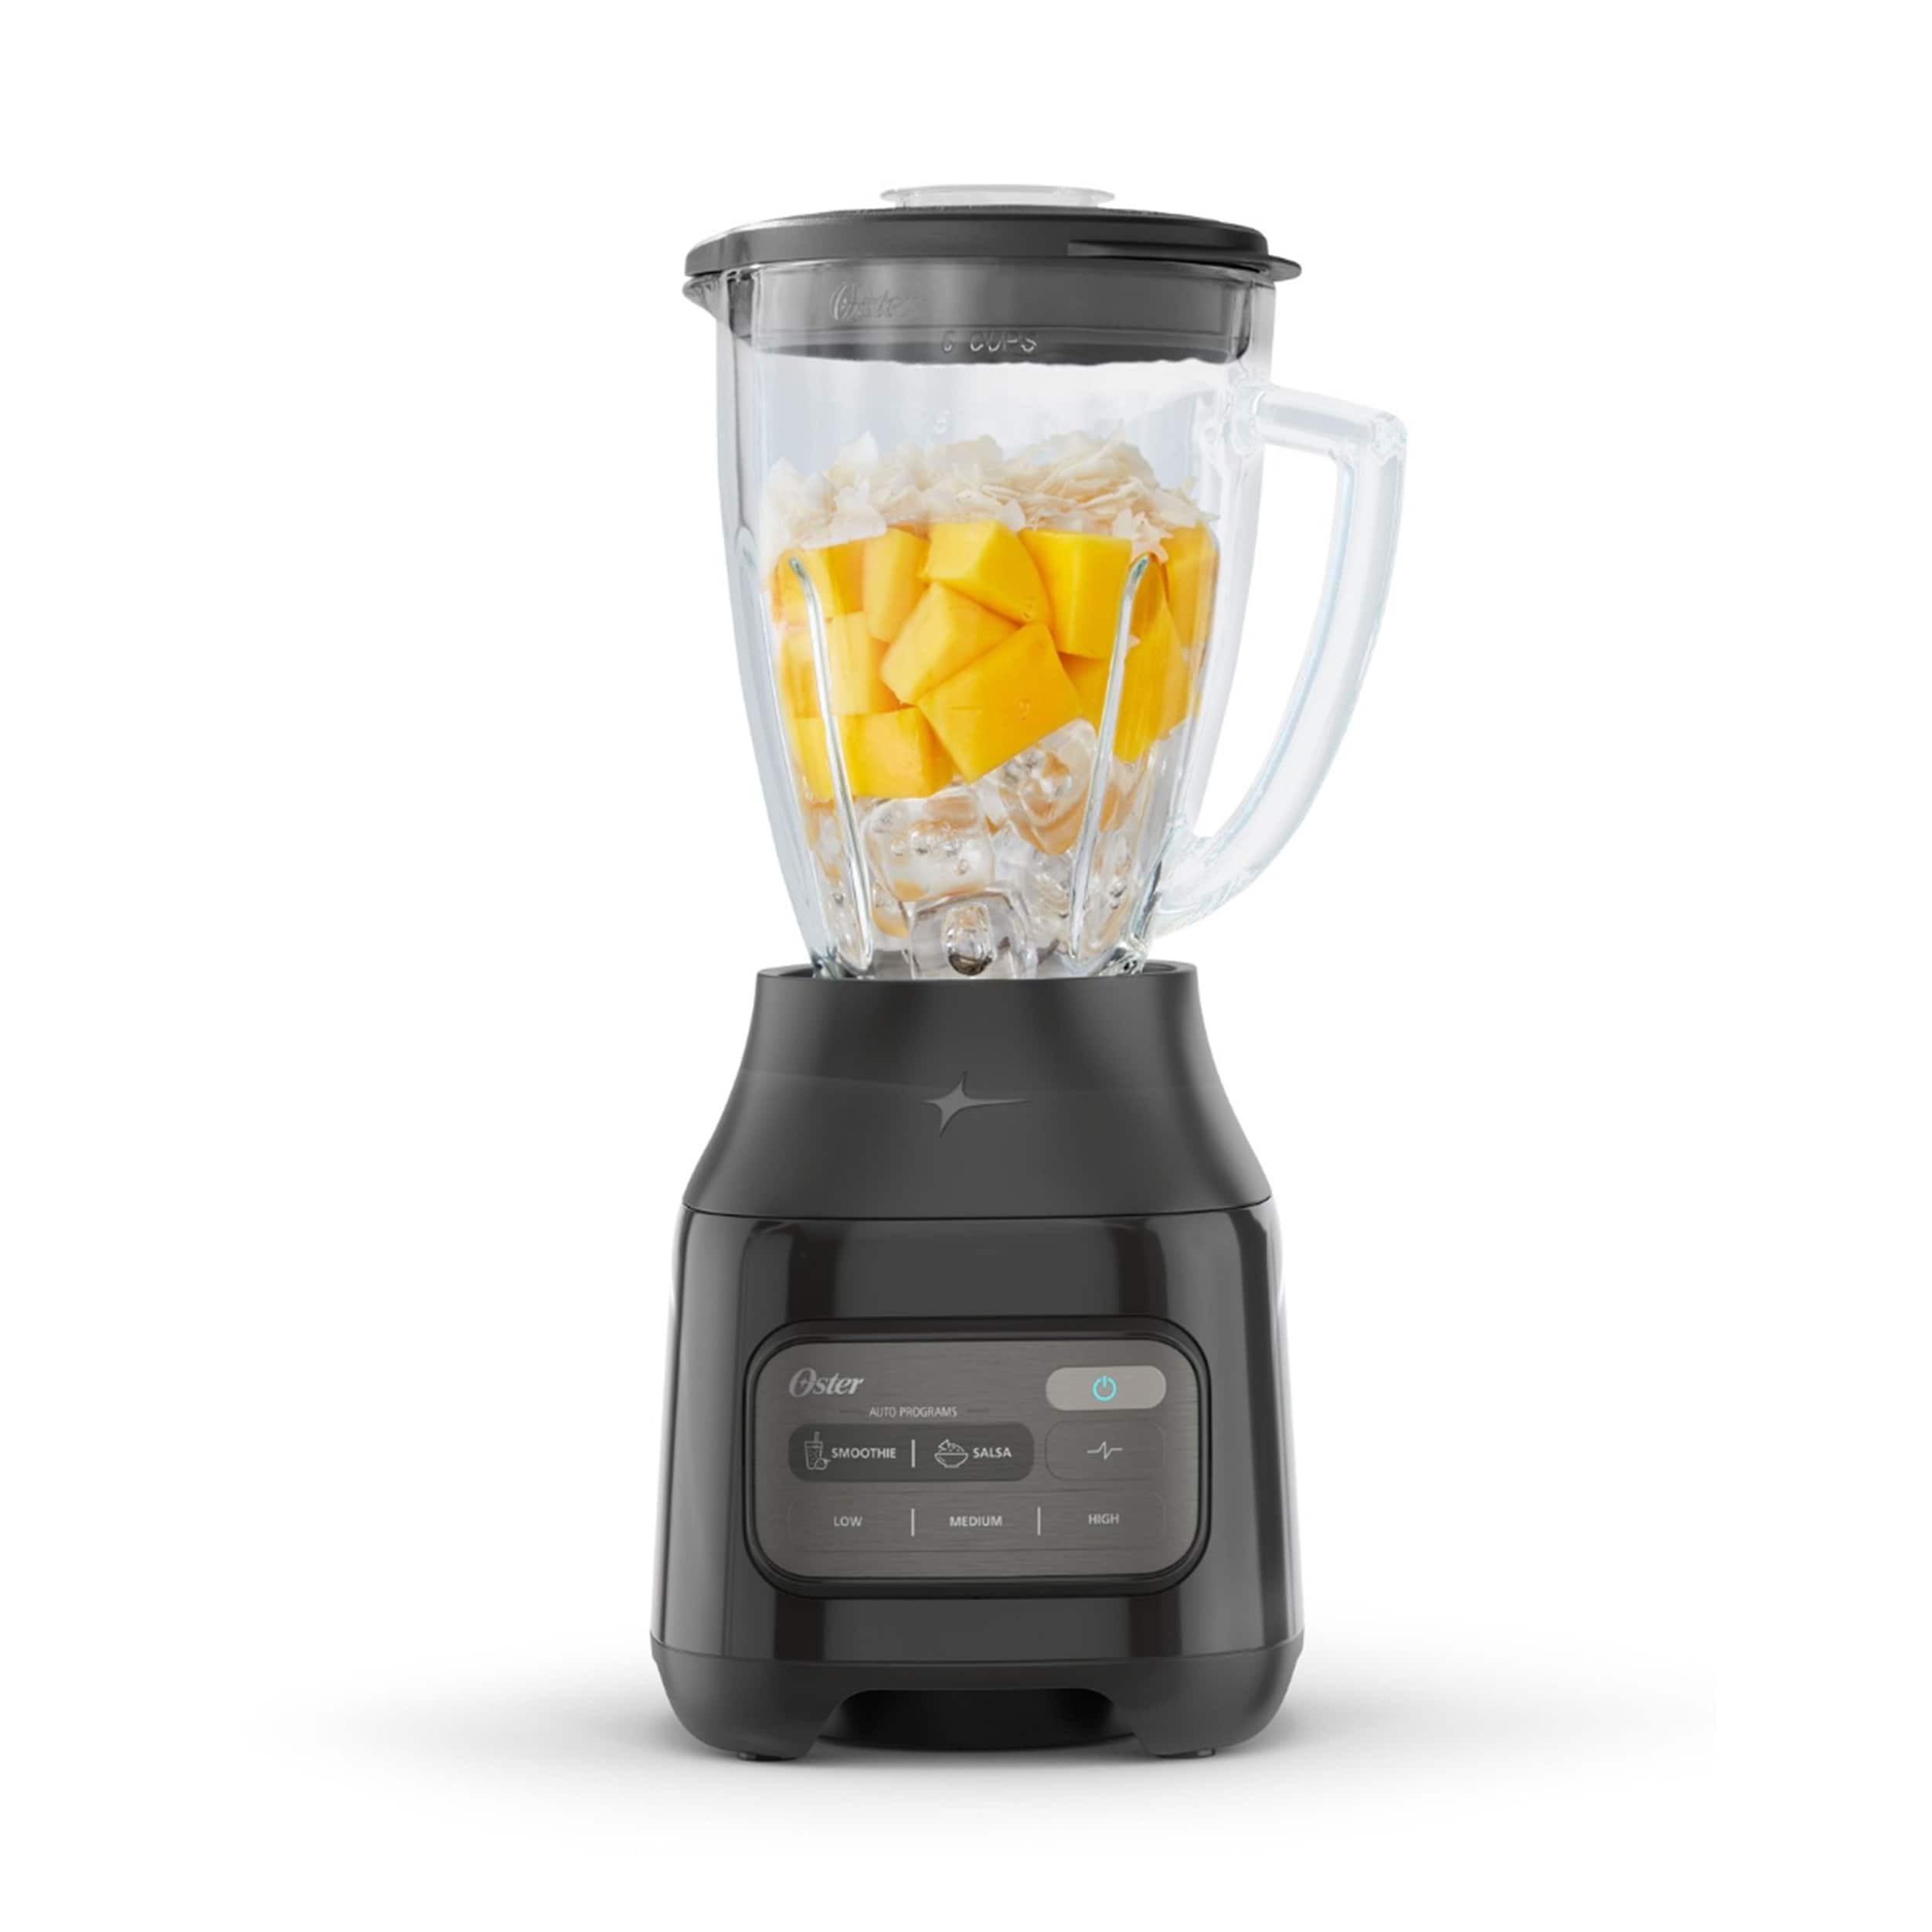 Oster 800 Watt 6 Cup One Touch Blender with Auto Program - On Sale